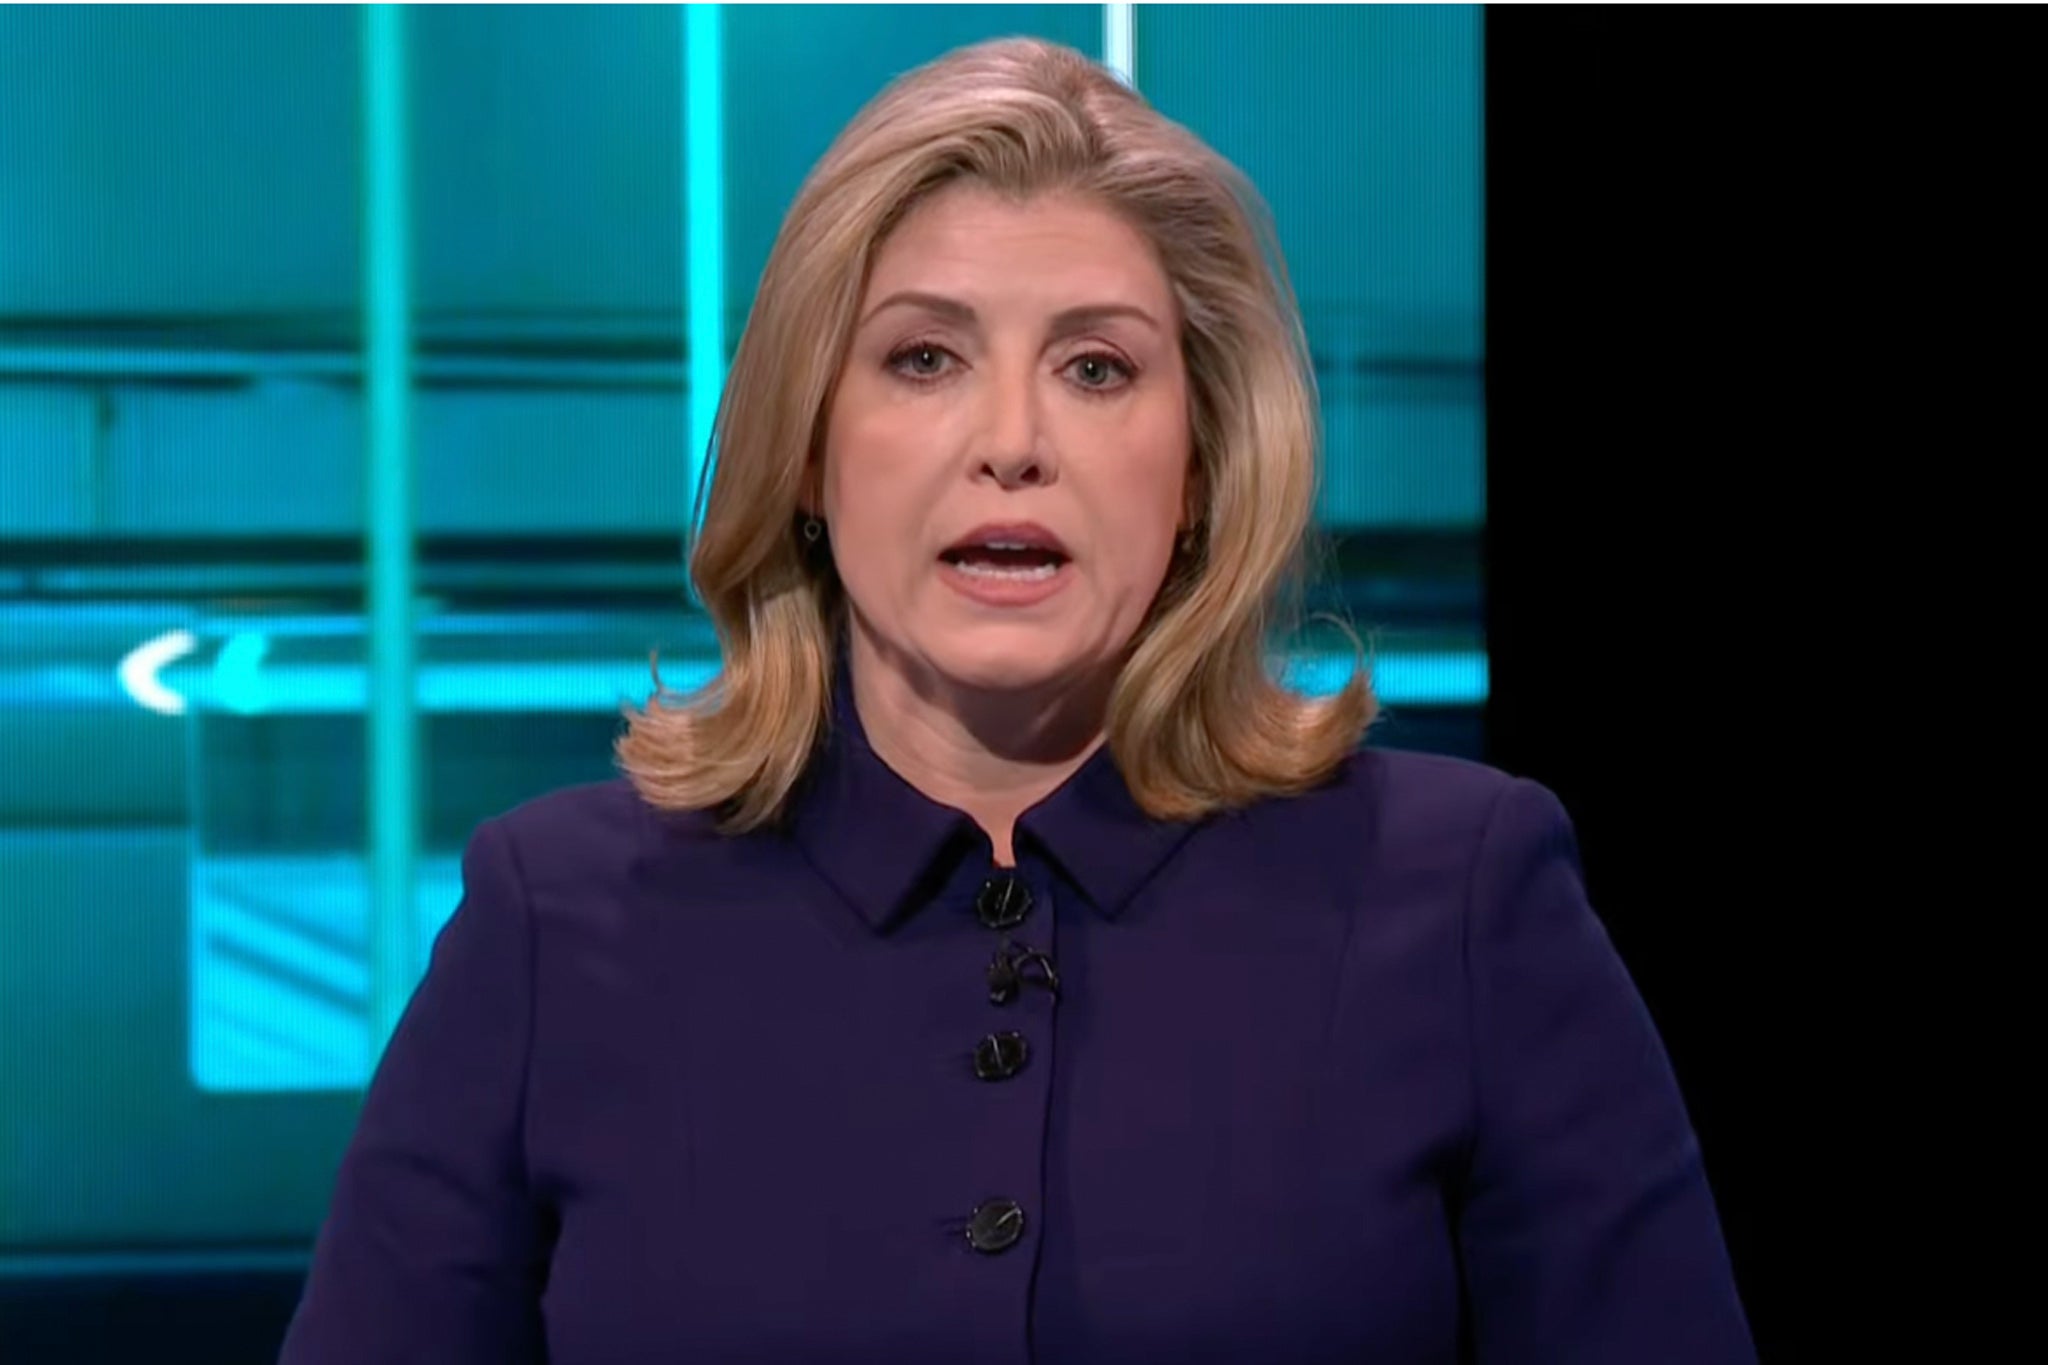 Penny Mordaunt is seen by many as a leader in waiting